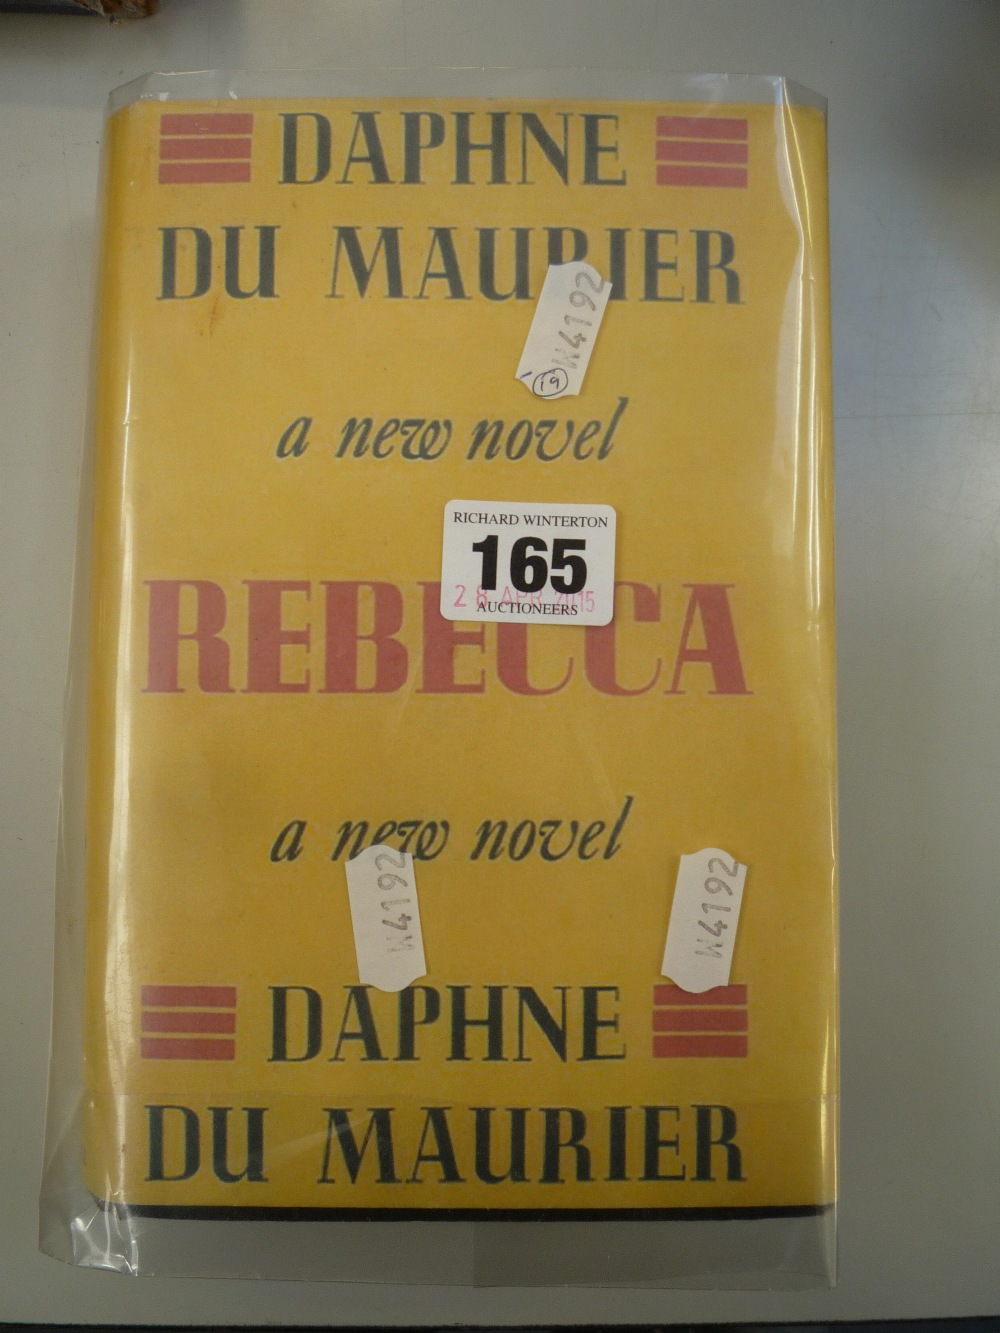 DU MAURIER, DAPHINE, REBECCA, 1st Edition, Gollancz, 1938, in facsimile dust jacket with faded and